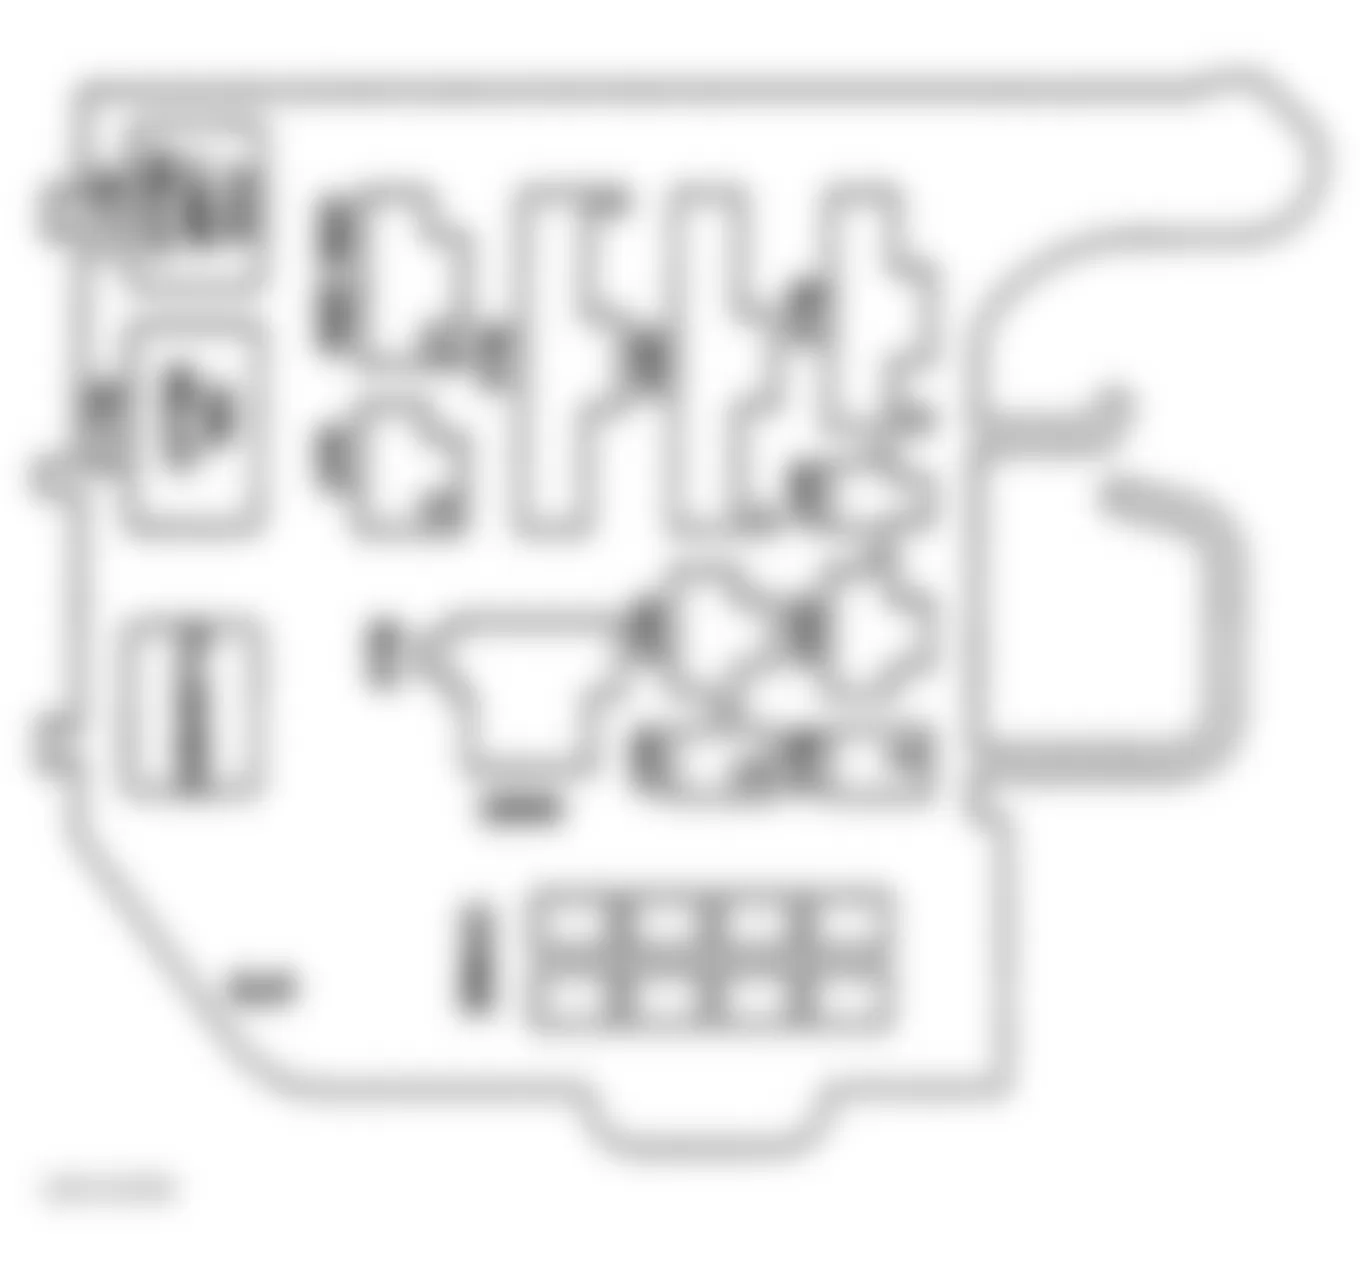 GMC Suburban K1500 1997 - Component Locations -  Identifying Convenience Center Components